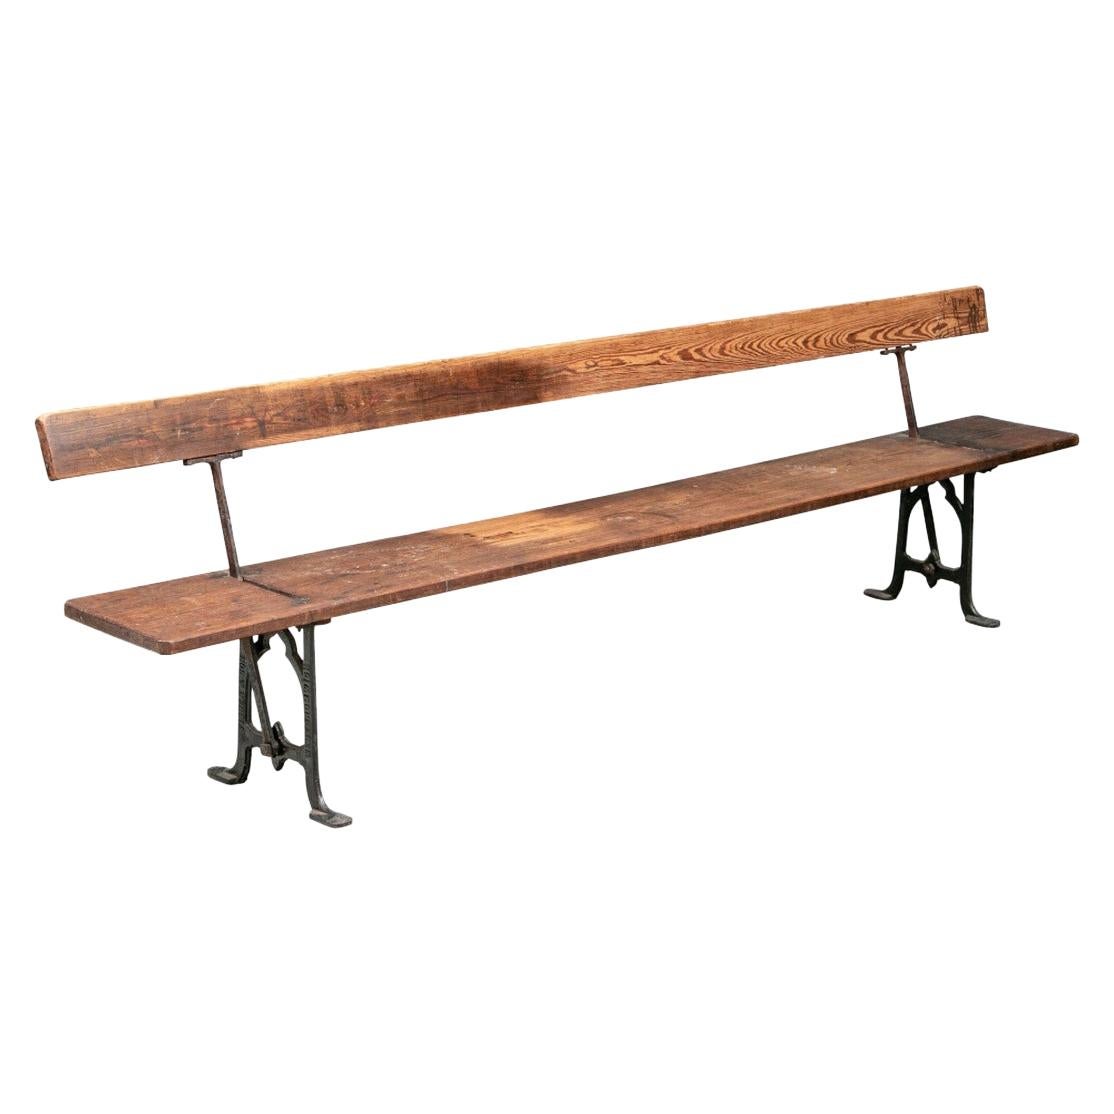 Long Antique Industrial Era Wood and Iron Railway Bench with Reversible Seat